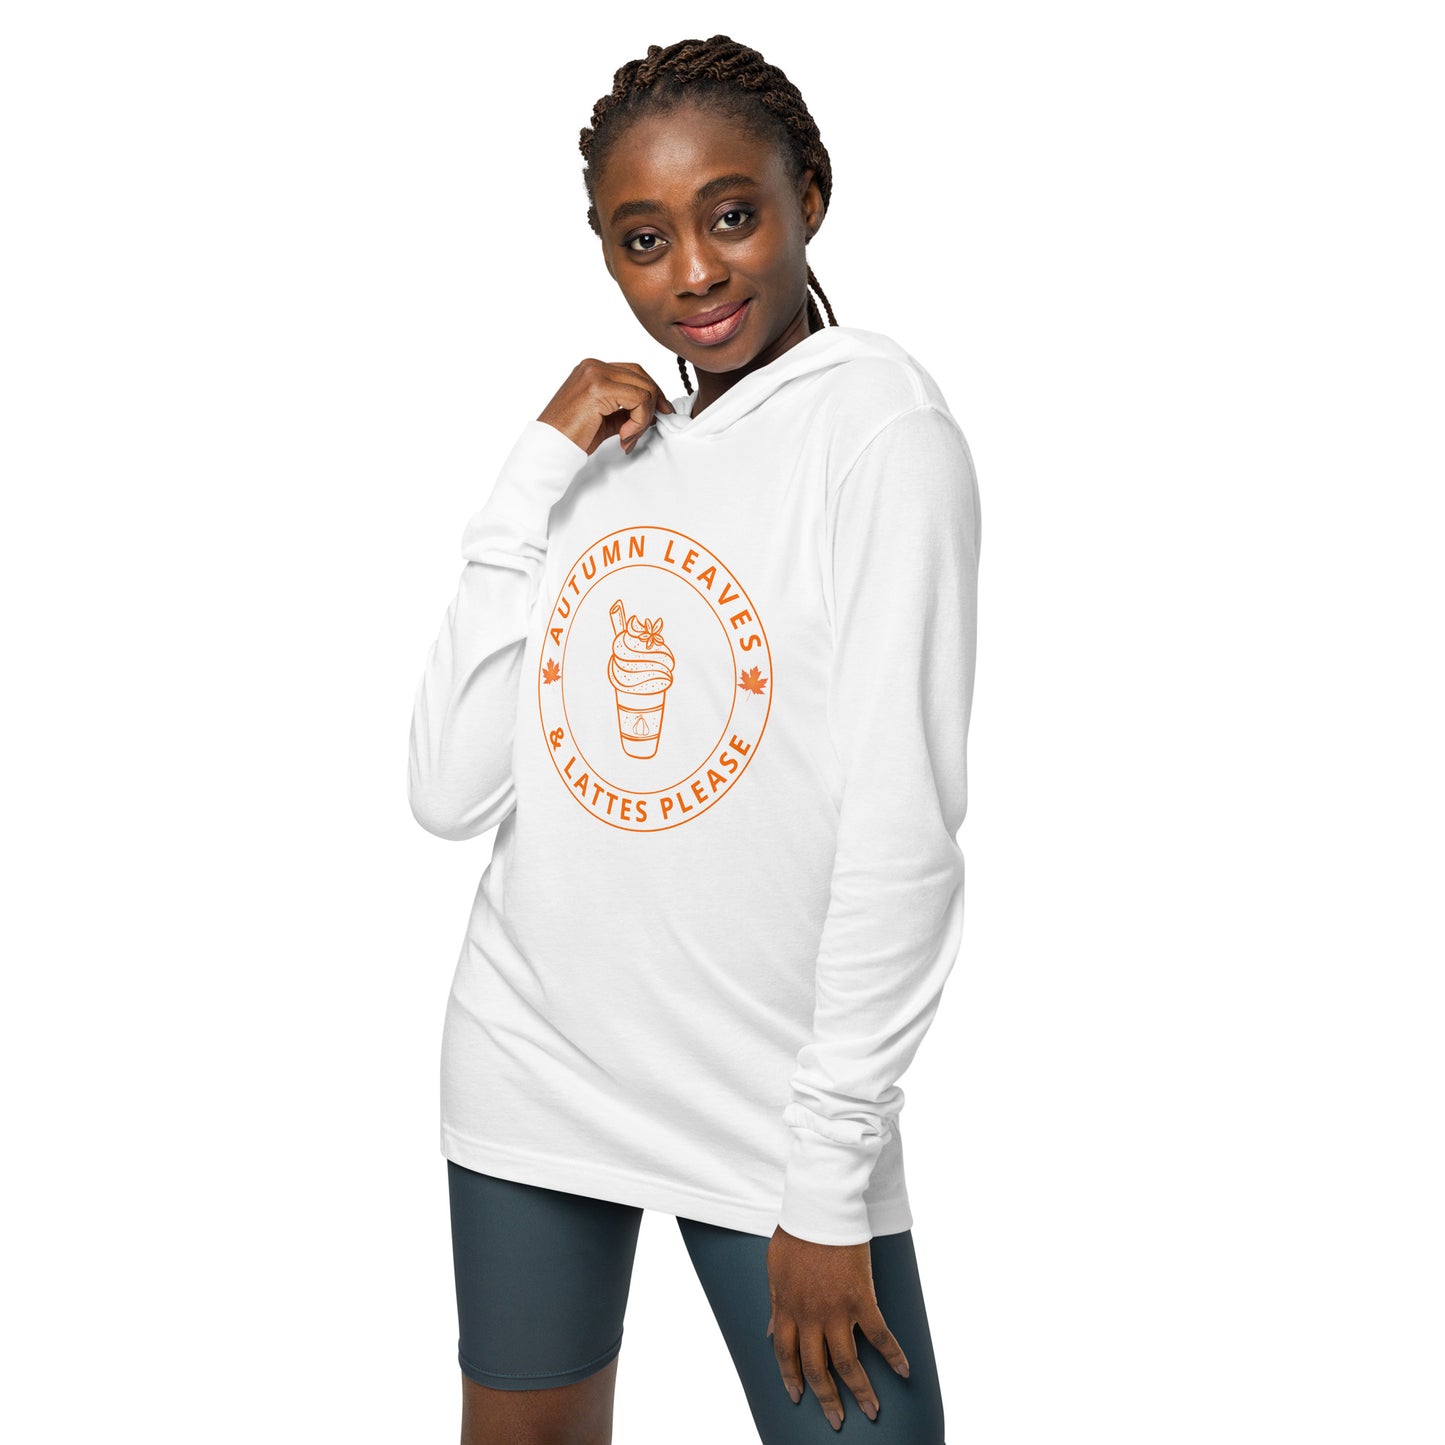 Autumn Leaves and Lattes Please Hooded Long-Sleeve Tee